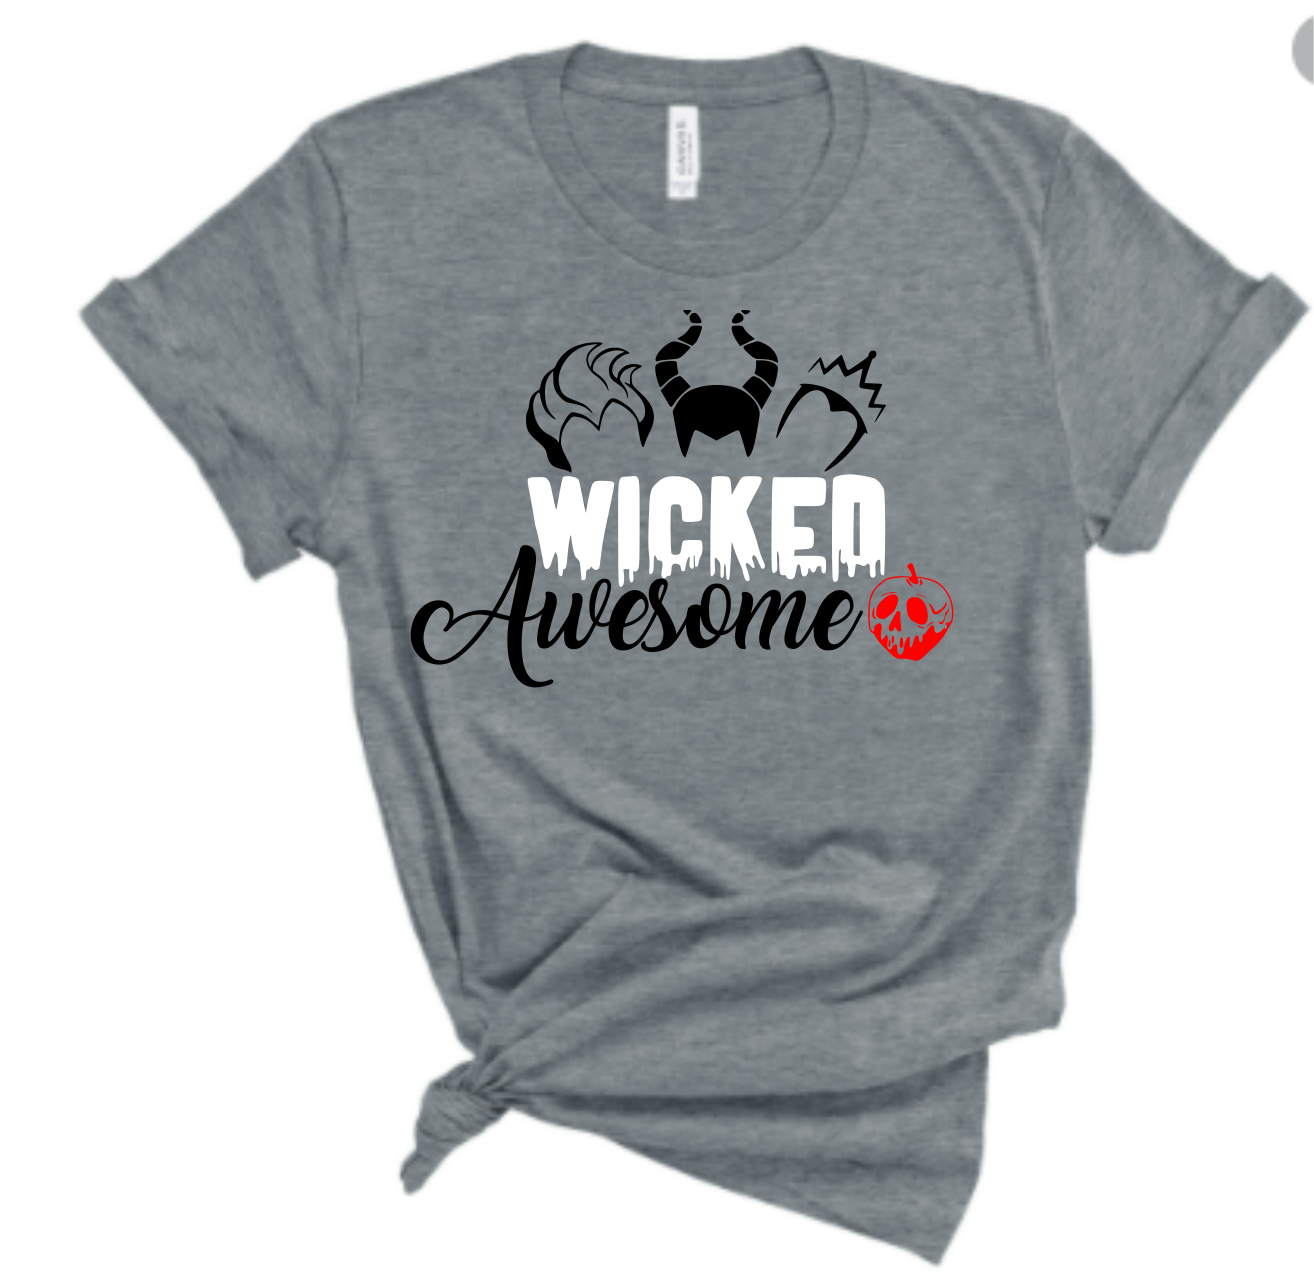 WICKED AWESOME ADULT UNISEX SHIRT